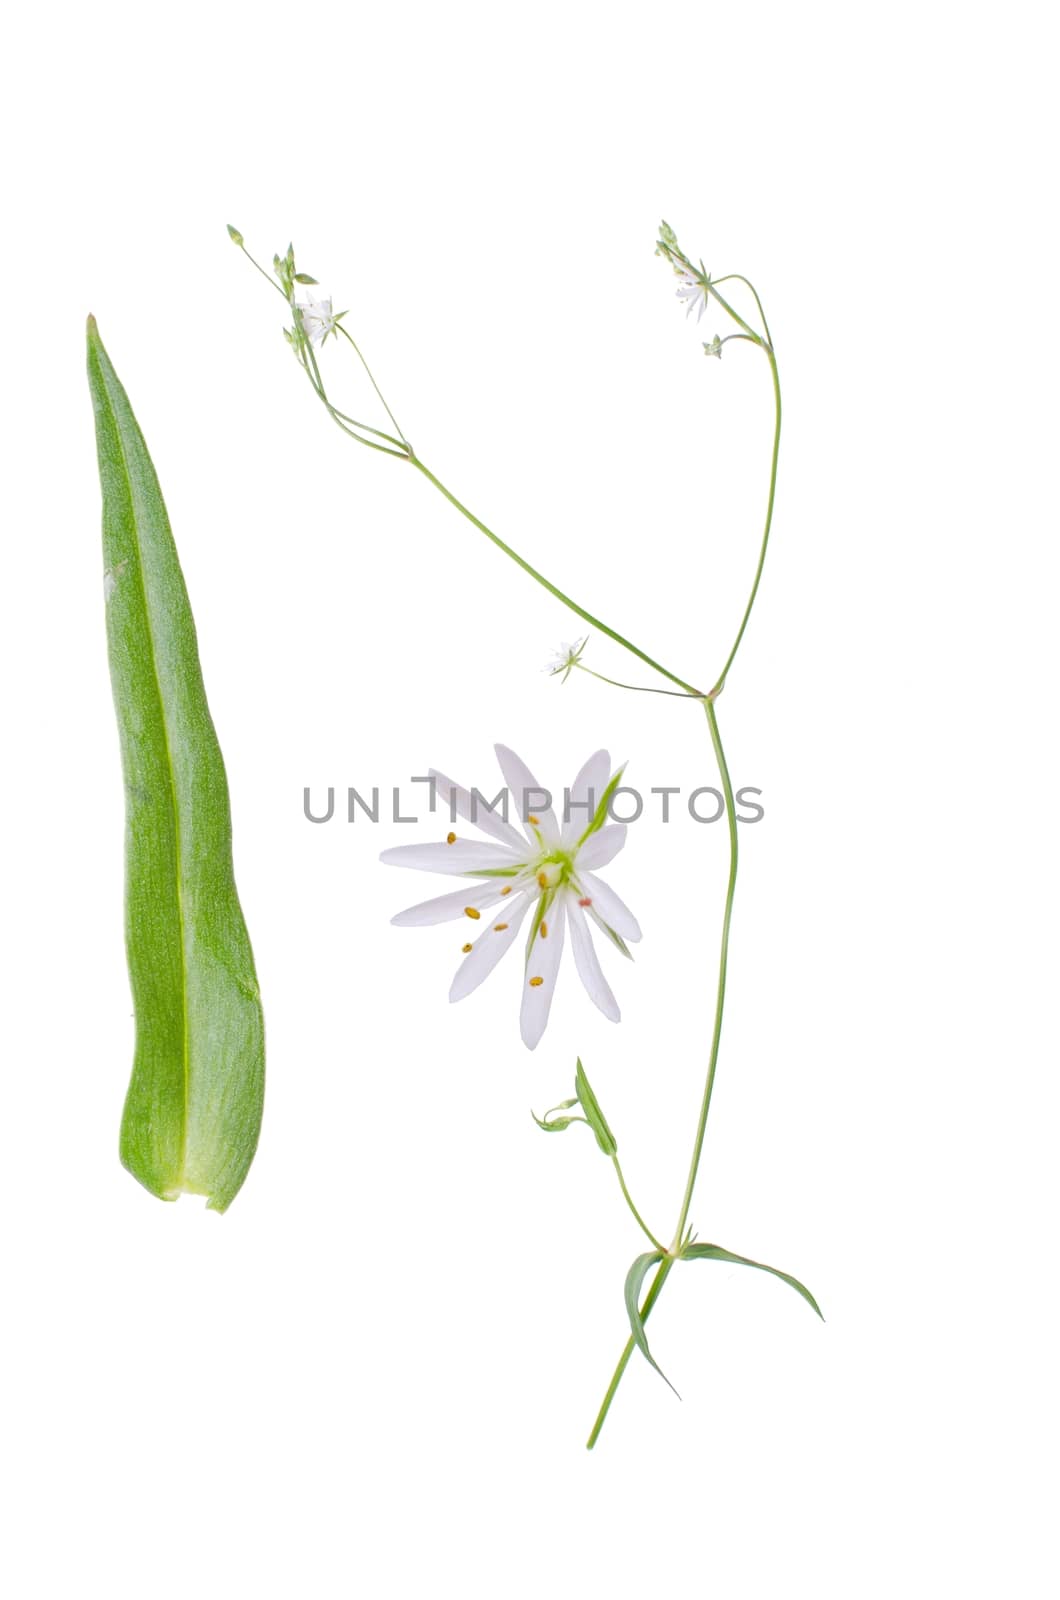 Stellaria graminea with details of bloom and leaf beside isolated on white background.